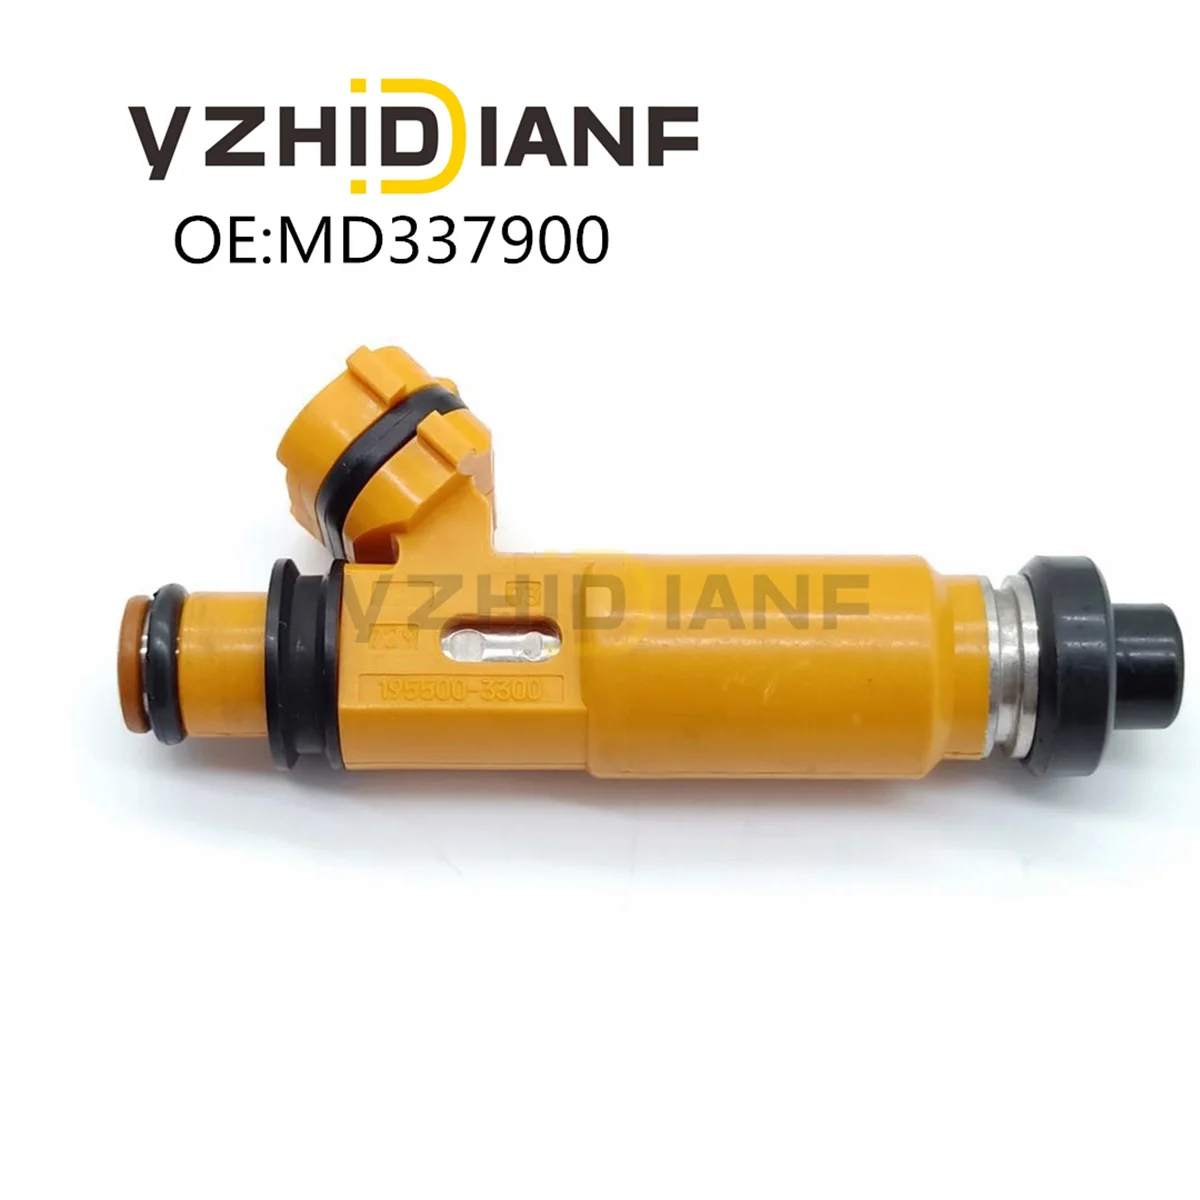 1x Fuel injector for Mitsubishi- Montero- 3.5L 6G74 1998 - 2004 OEM# MD337900 195500-3300 1955003300